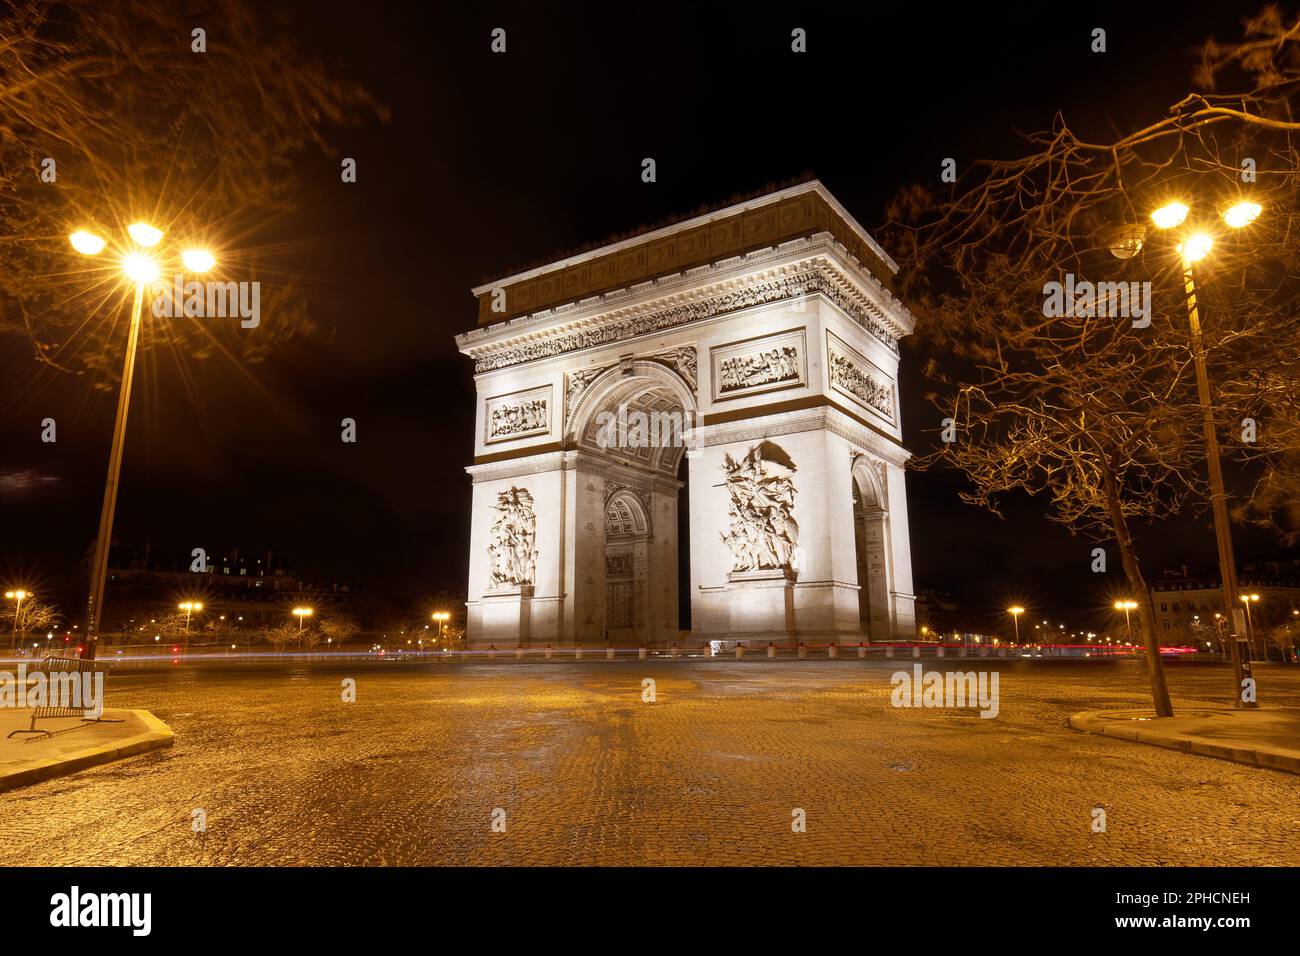 The Triumphal Arch is one of the most famous monuments in Paris. It ...